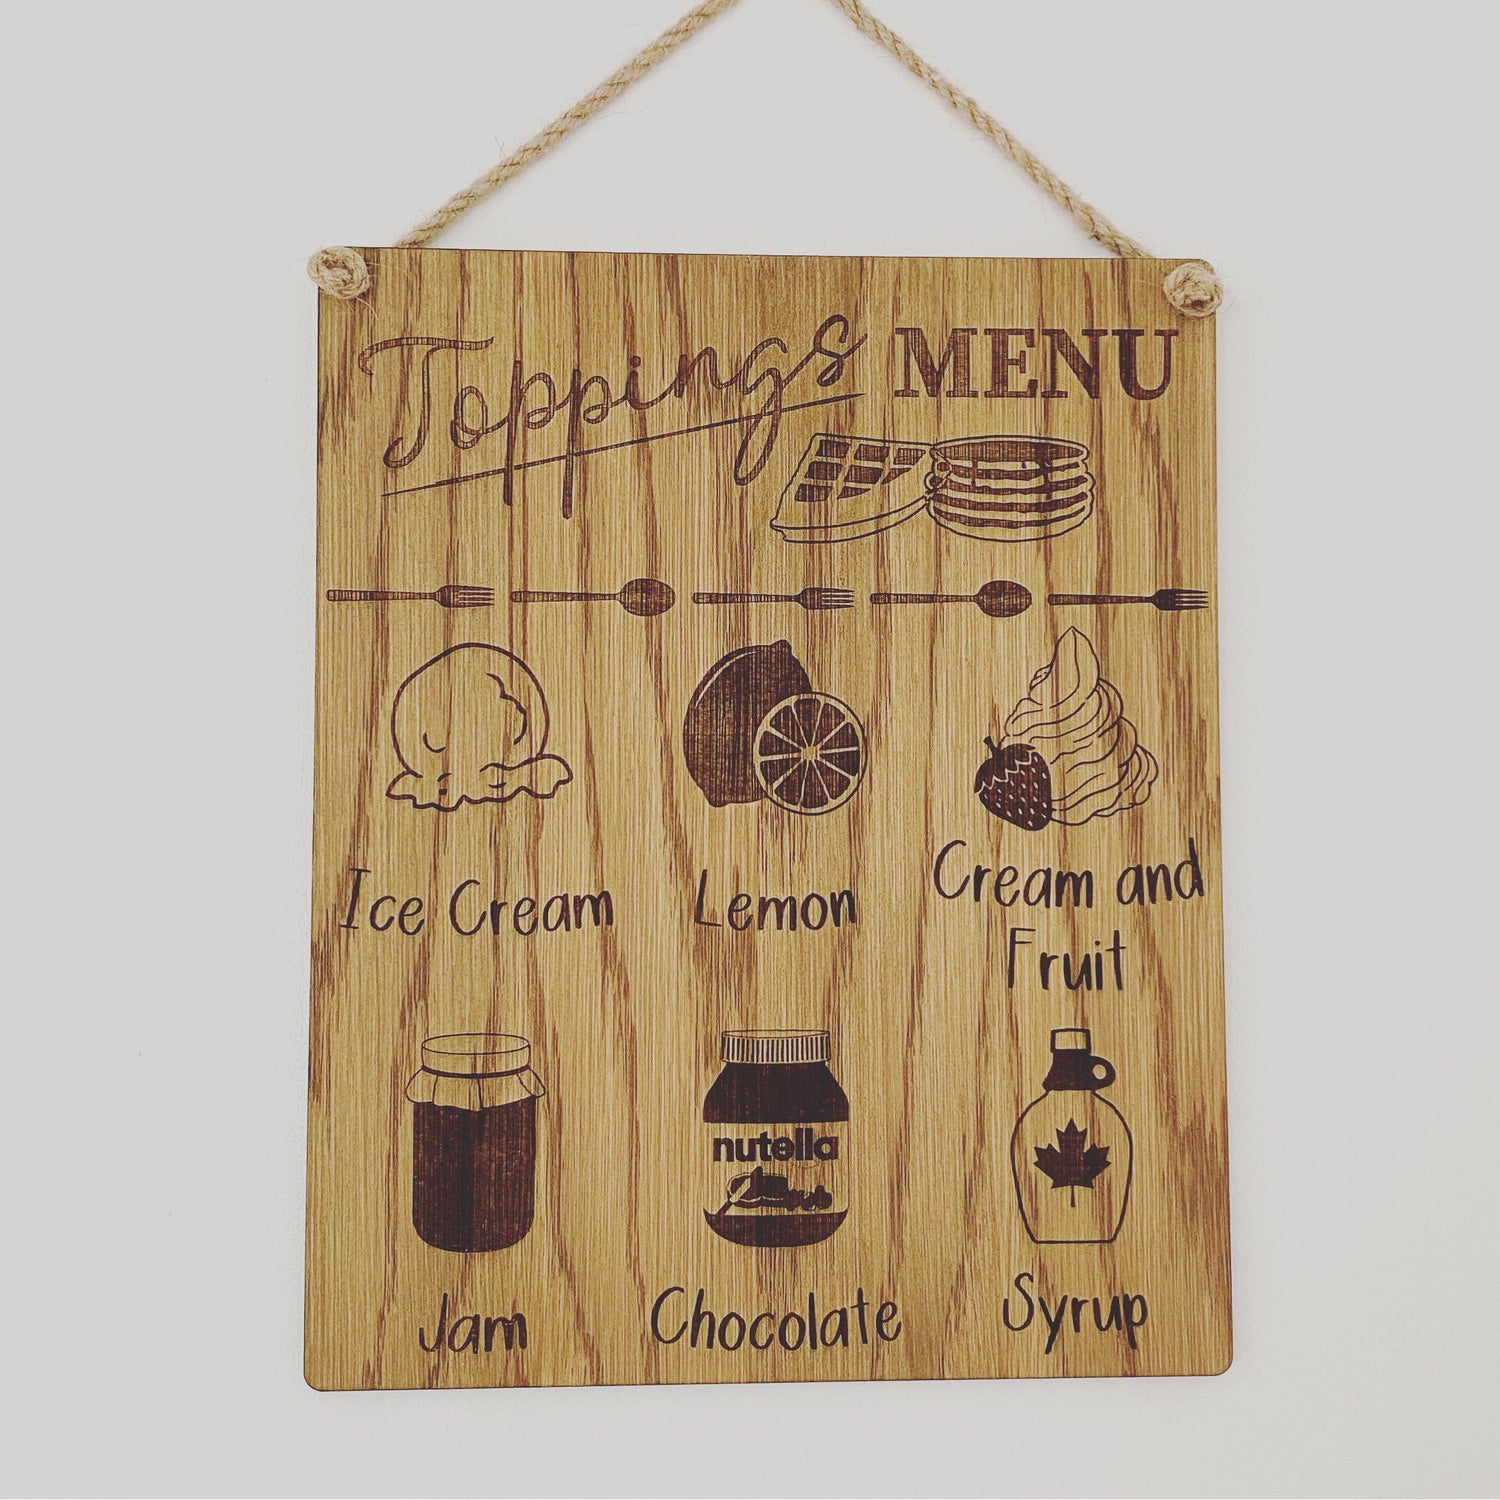 Toppings Menu | Pancake Toppings | Waffle Toppings | Ice Cream Toppings | Kitchen Wall Decor | New Home Gift | Shop Menu |Nutella Lover Gift